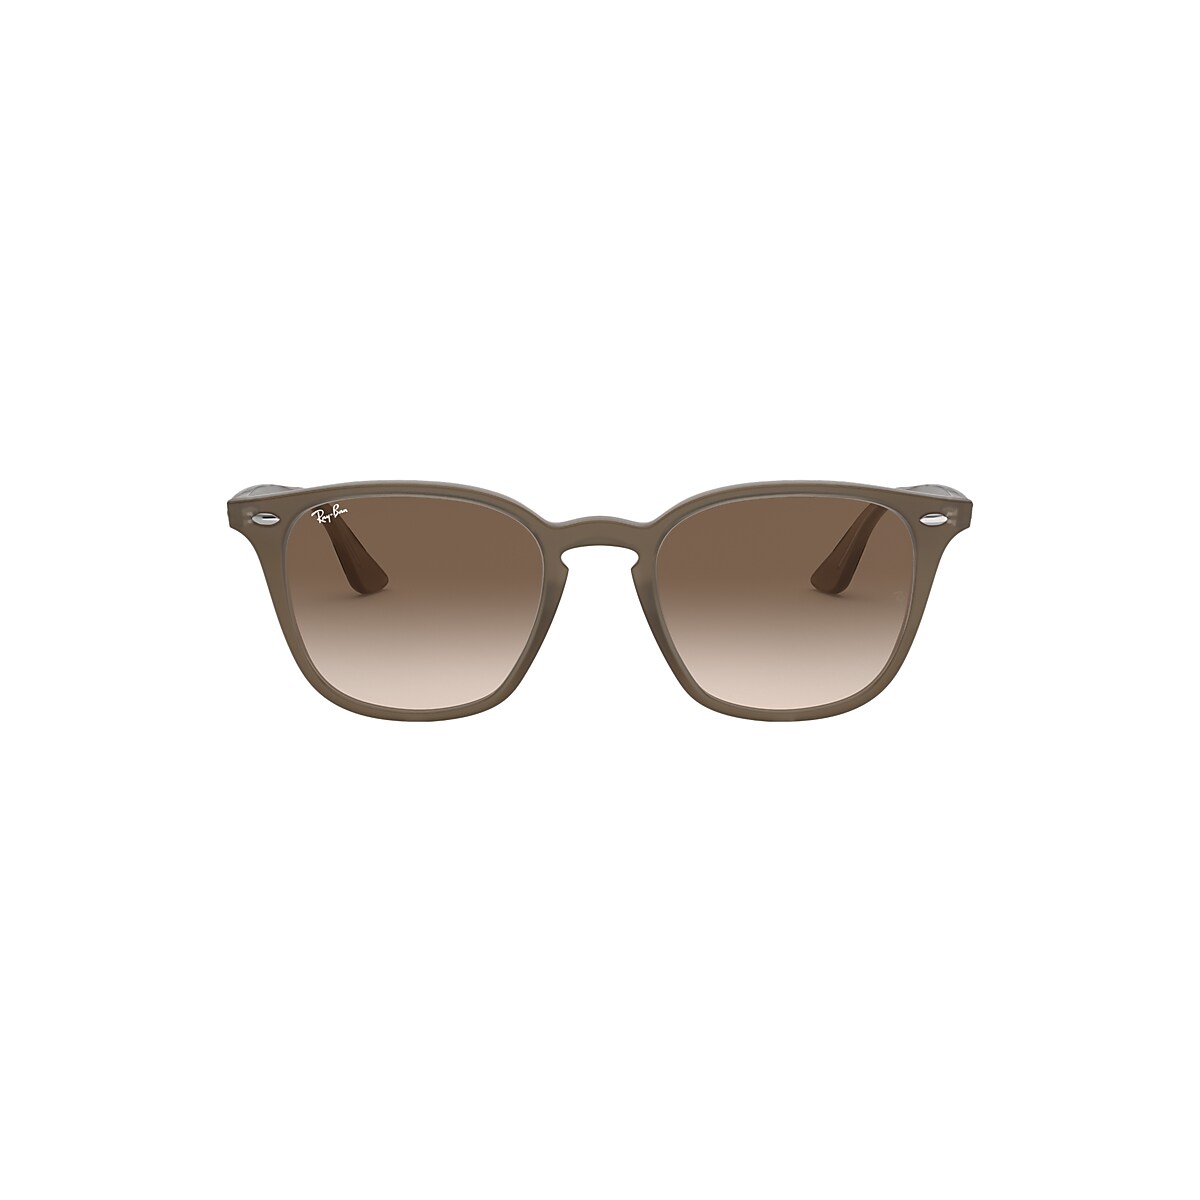 RB4258 Sunglasses in Beige and Brown - RB4258F | Ray-Ban® CA